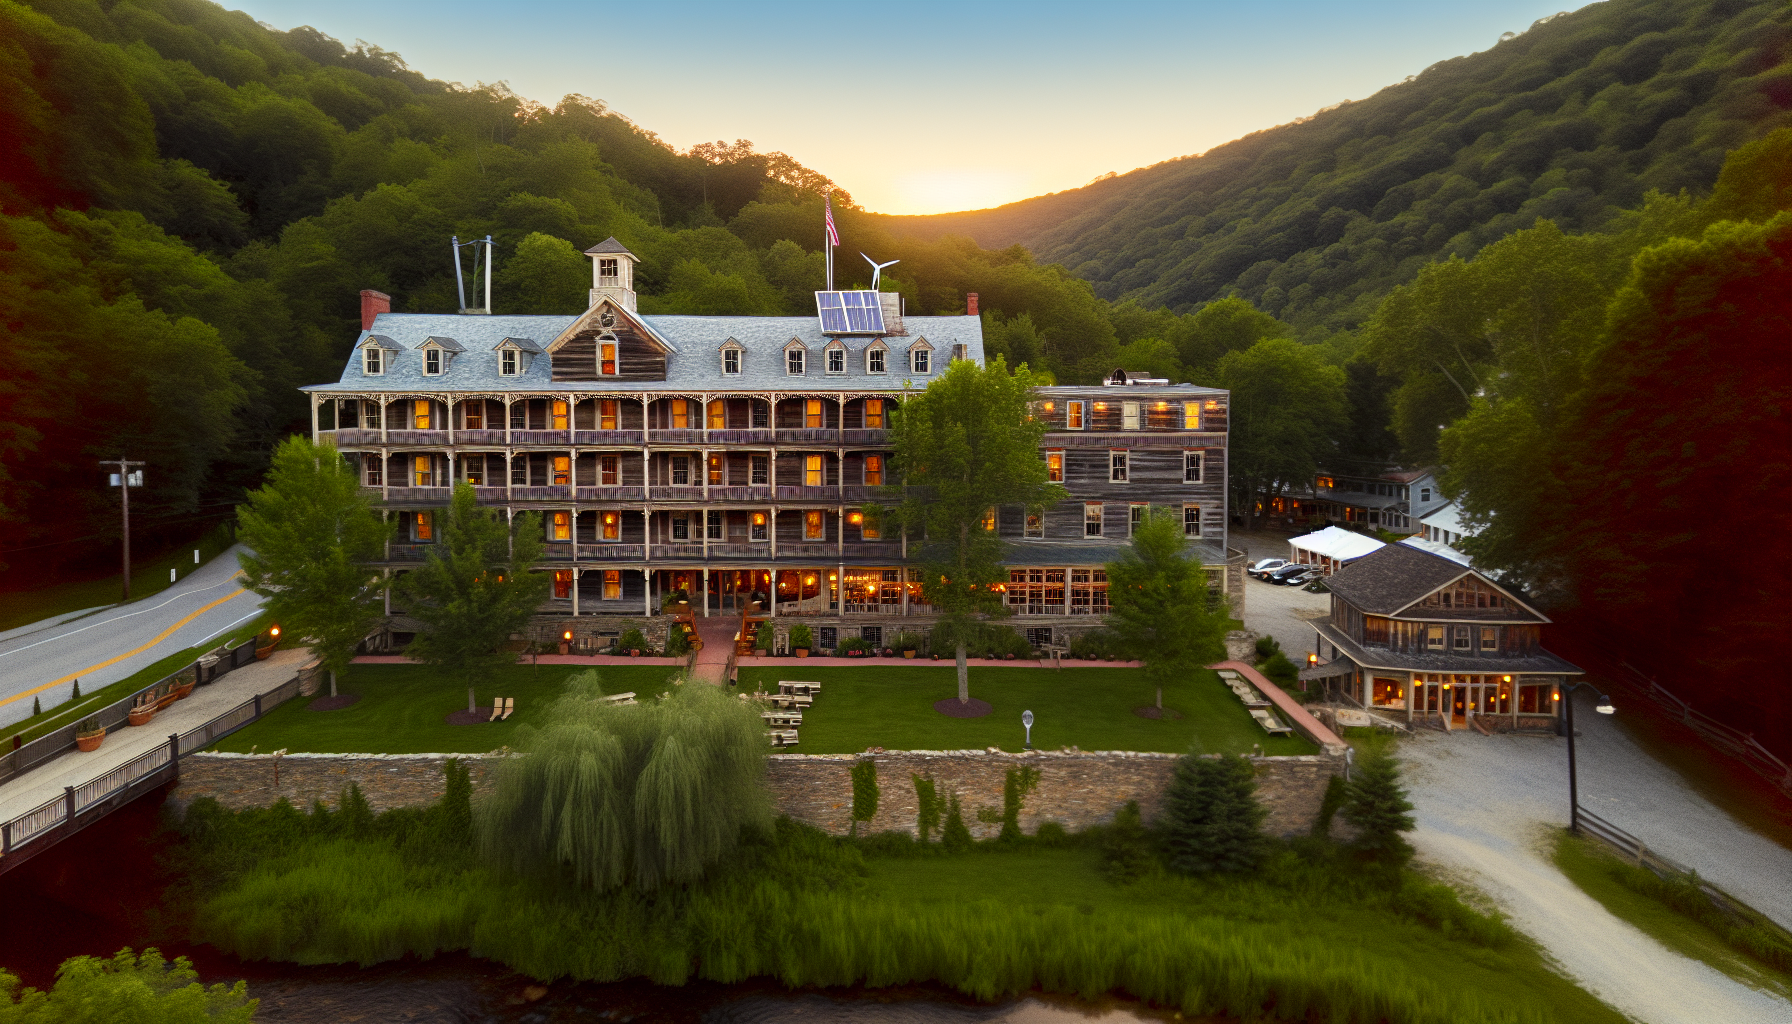 Experiencing Appalachian charm and sustainable luxury at the historic Rocky Waters Inn